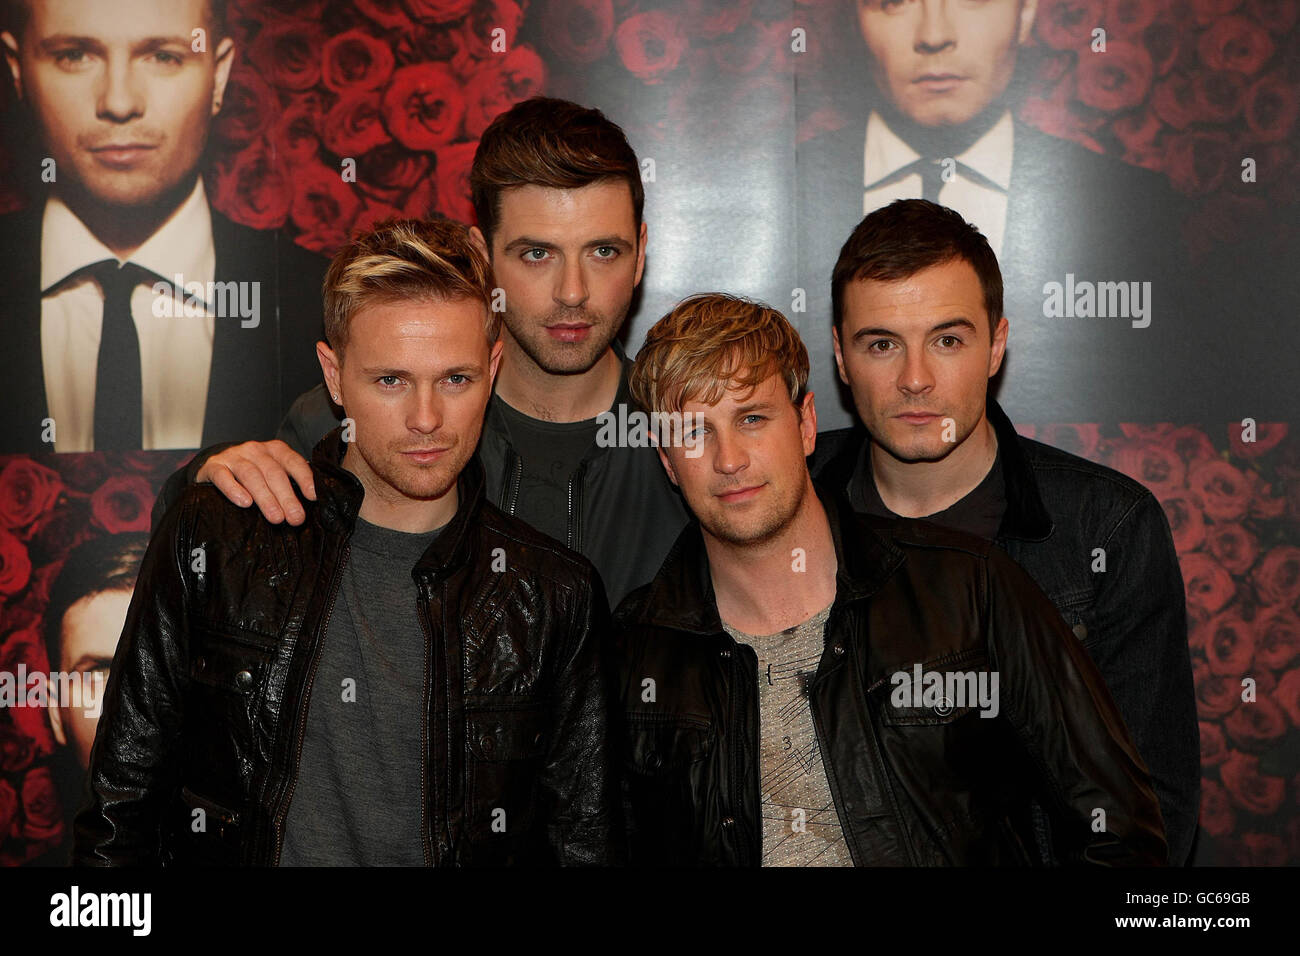 Members of boy band, Westlife (left to right) Nicky Byrne, Mark Feehily, Kian Egan and Shane Filan at the launch of their new perfume 'Westlife X' at a photocall in the Four Seasons Hotel Dublin. Stock Photo